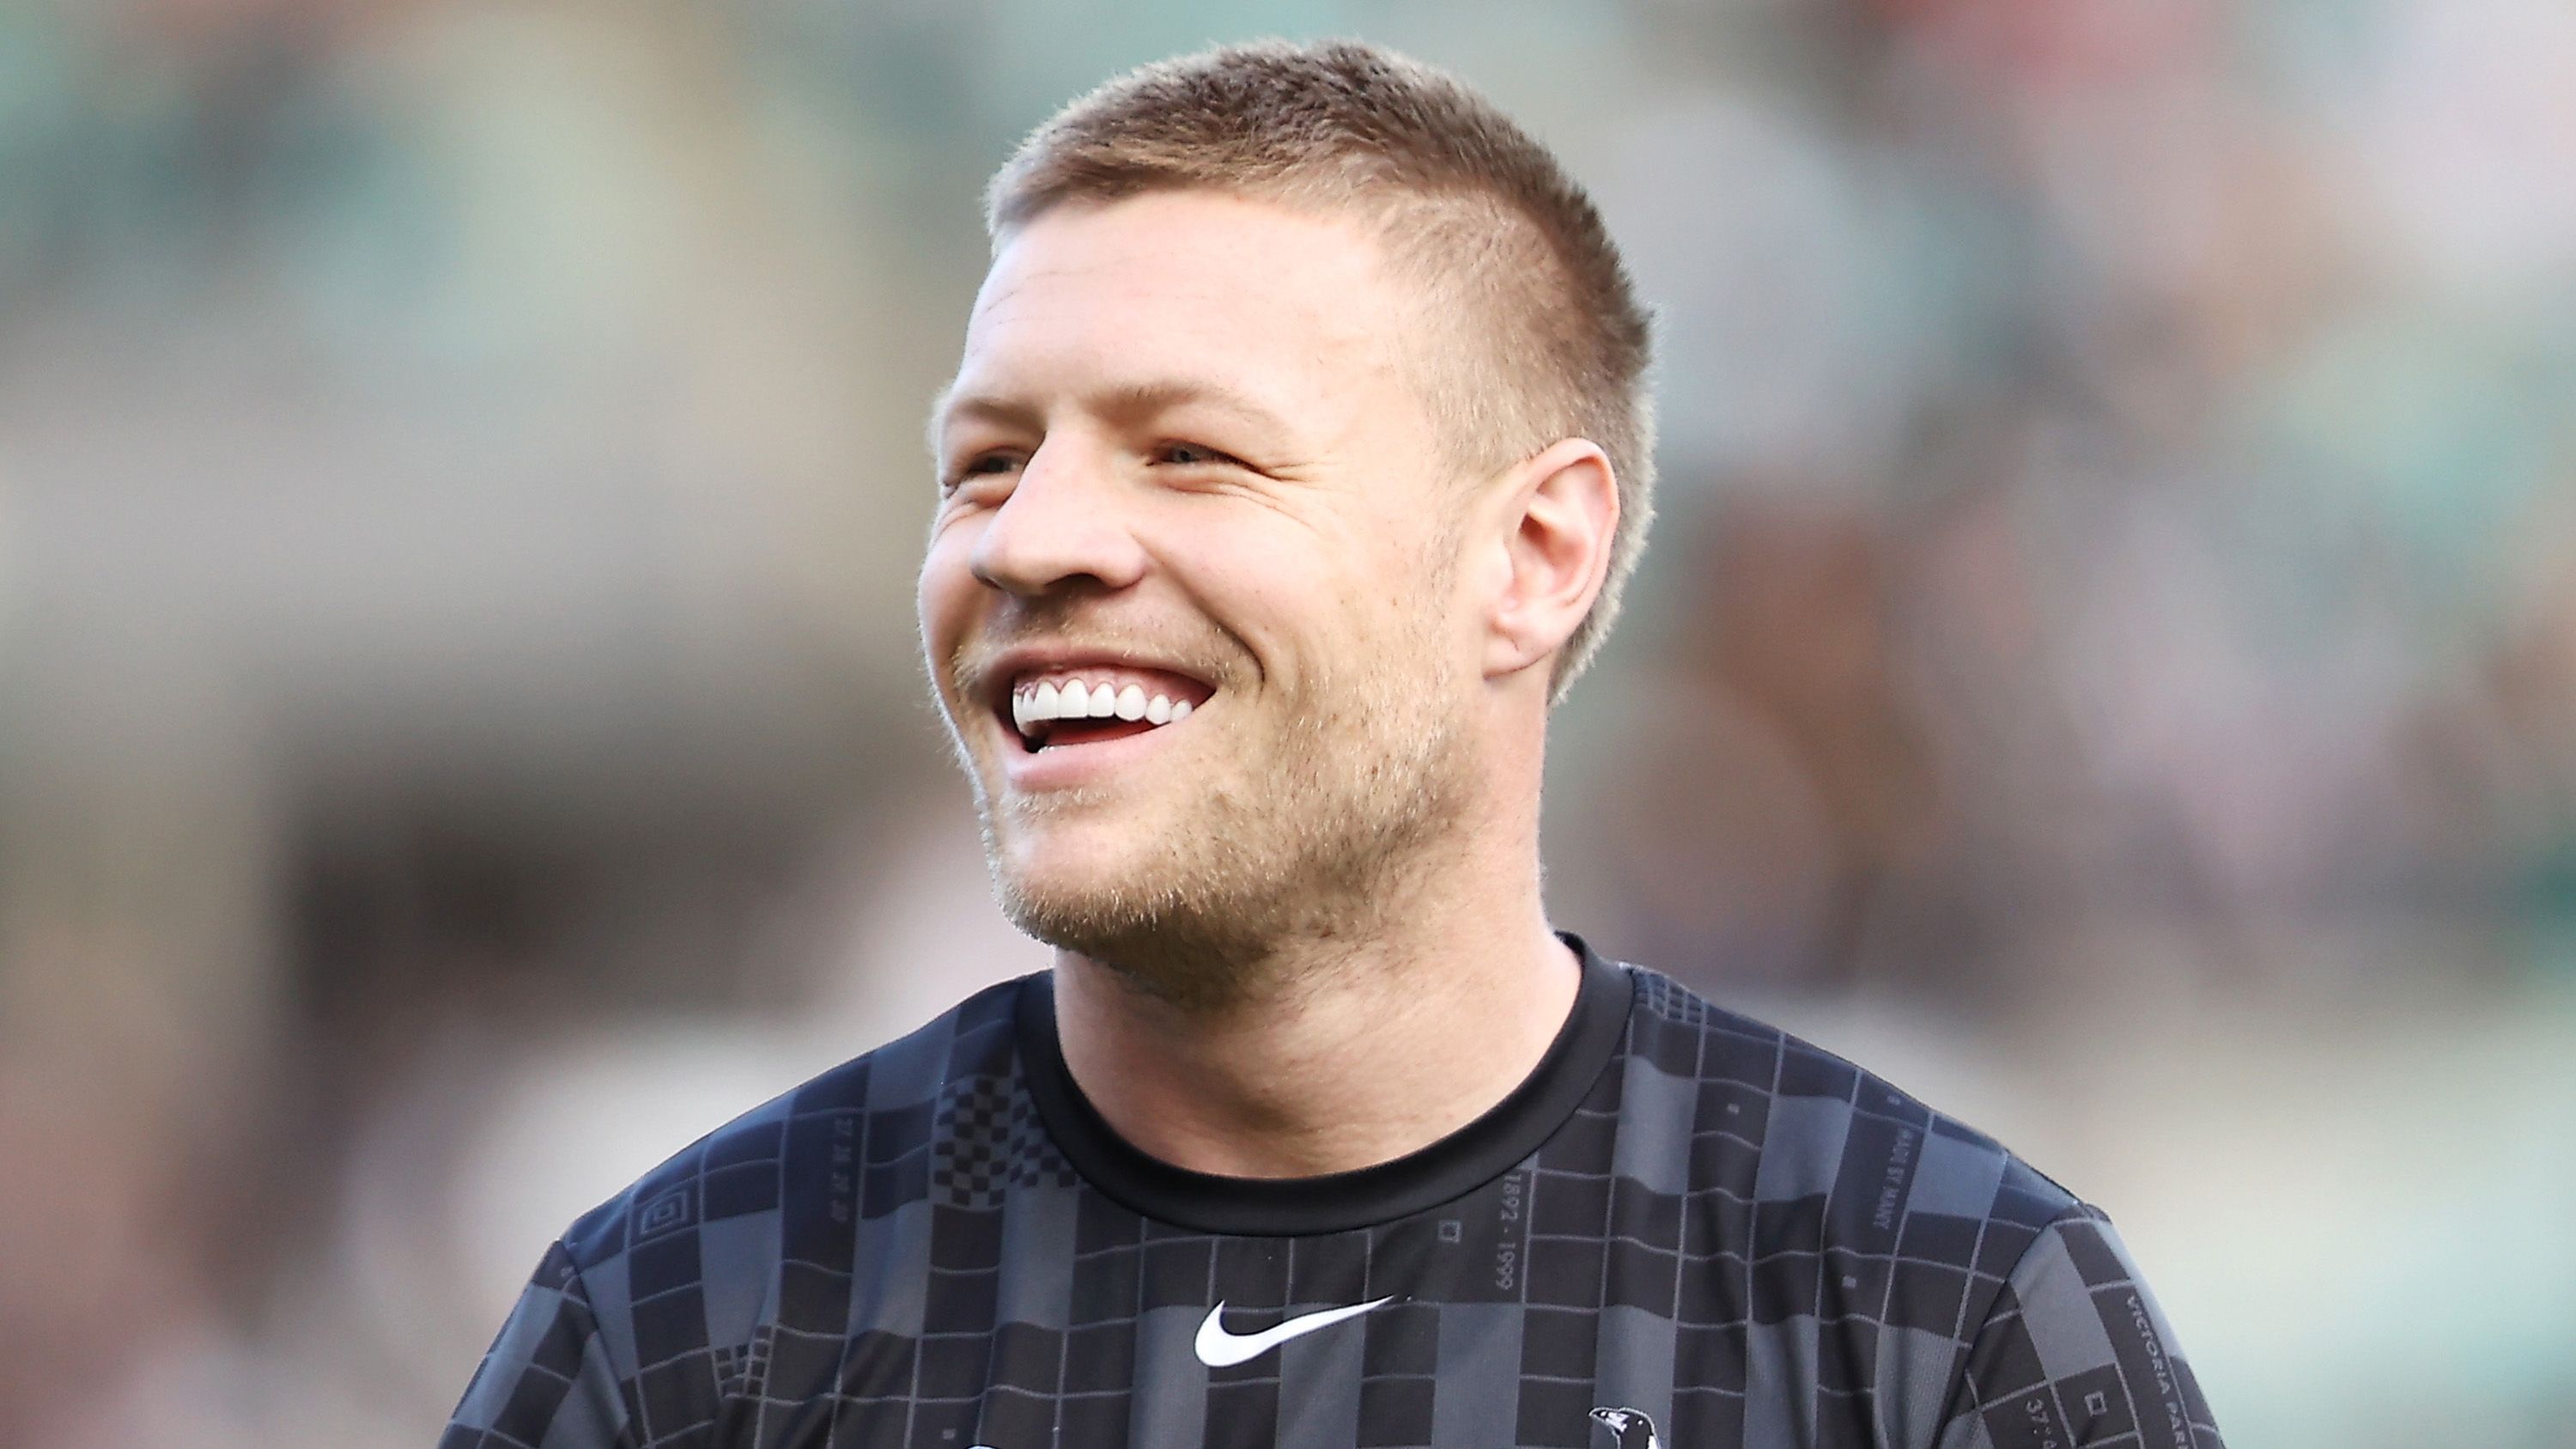 Jordan De Goey of the Magpies shares a laugh with his team mate during the warm-up before the AFL Second Preliminary match between the Sydney Swans and the Collingwood Magpies at Sydney Cricket Ground on September 17, 2022 in Sydney, Australia. (Photo by Mark Kolbe/AFL Photos/via Getty Images)